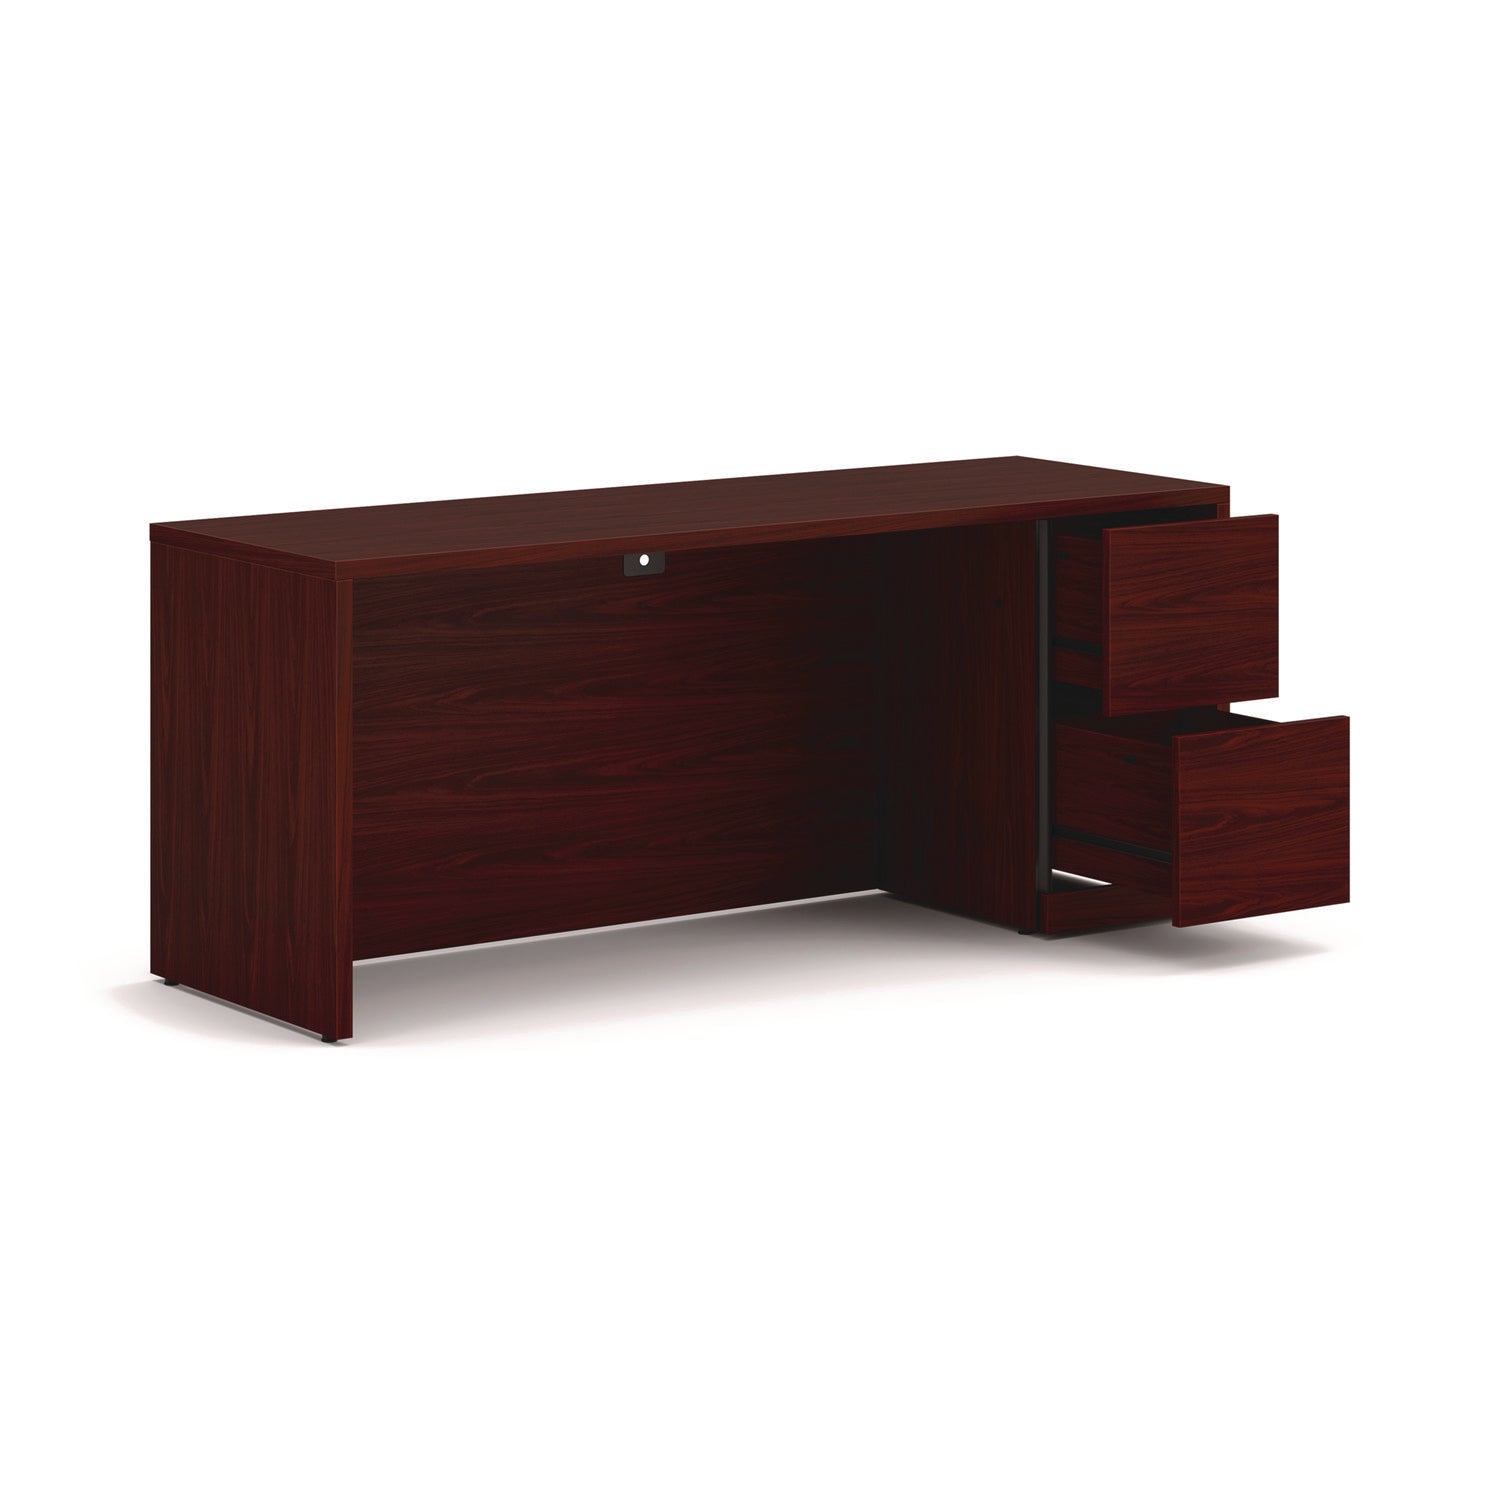 10500 Series Full-Height Right Pedestal Credenza, 72w x 24d x 29.5h, Mahogany - 